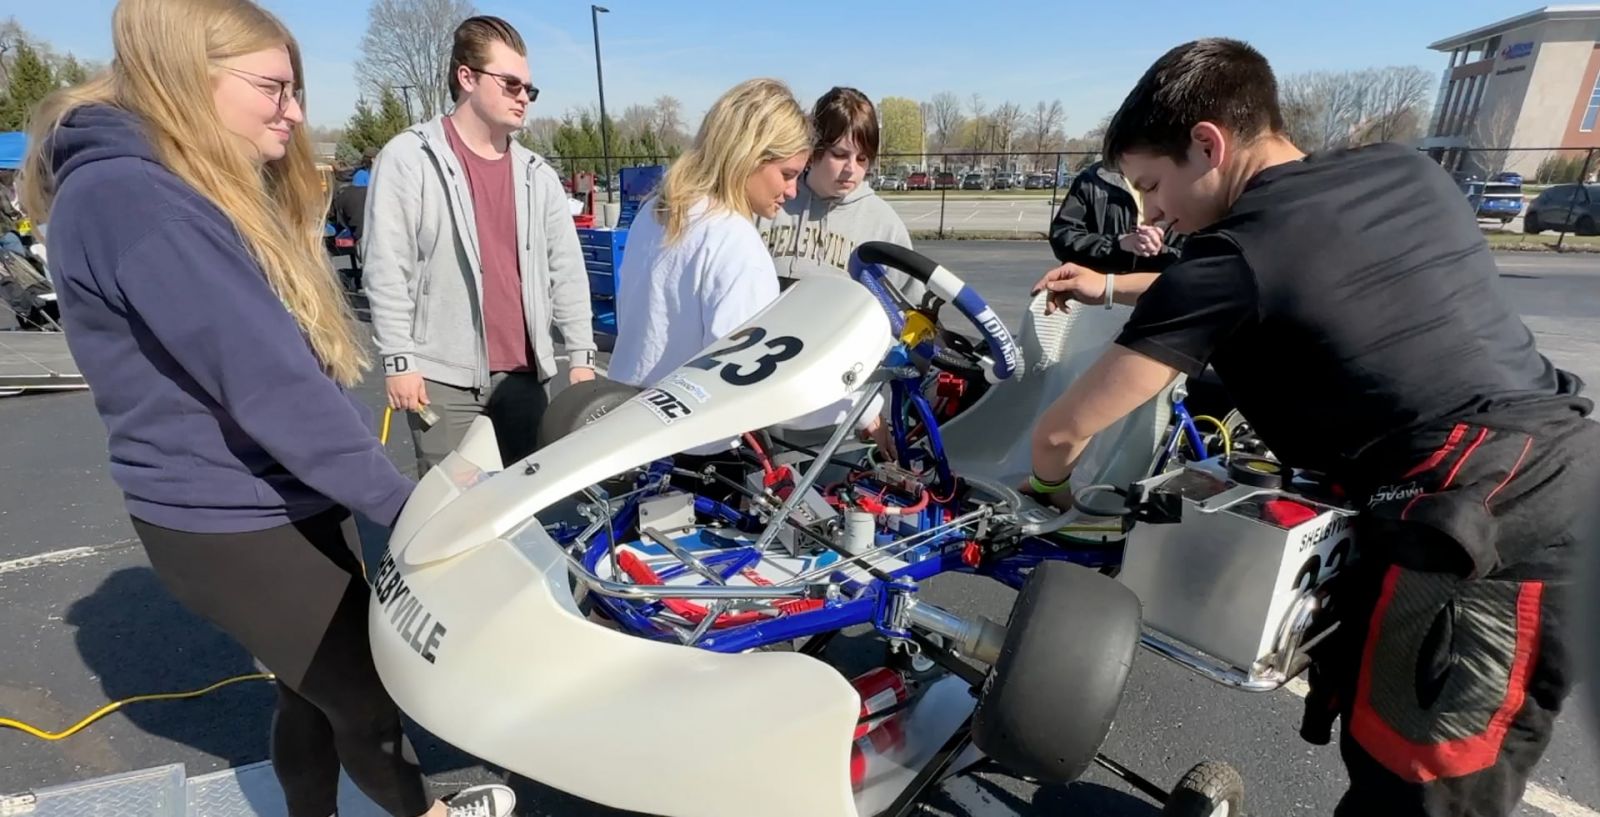 Students from Shellbyville High School's team work on their electric kart. (Purdue University photo/John O'Malley)